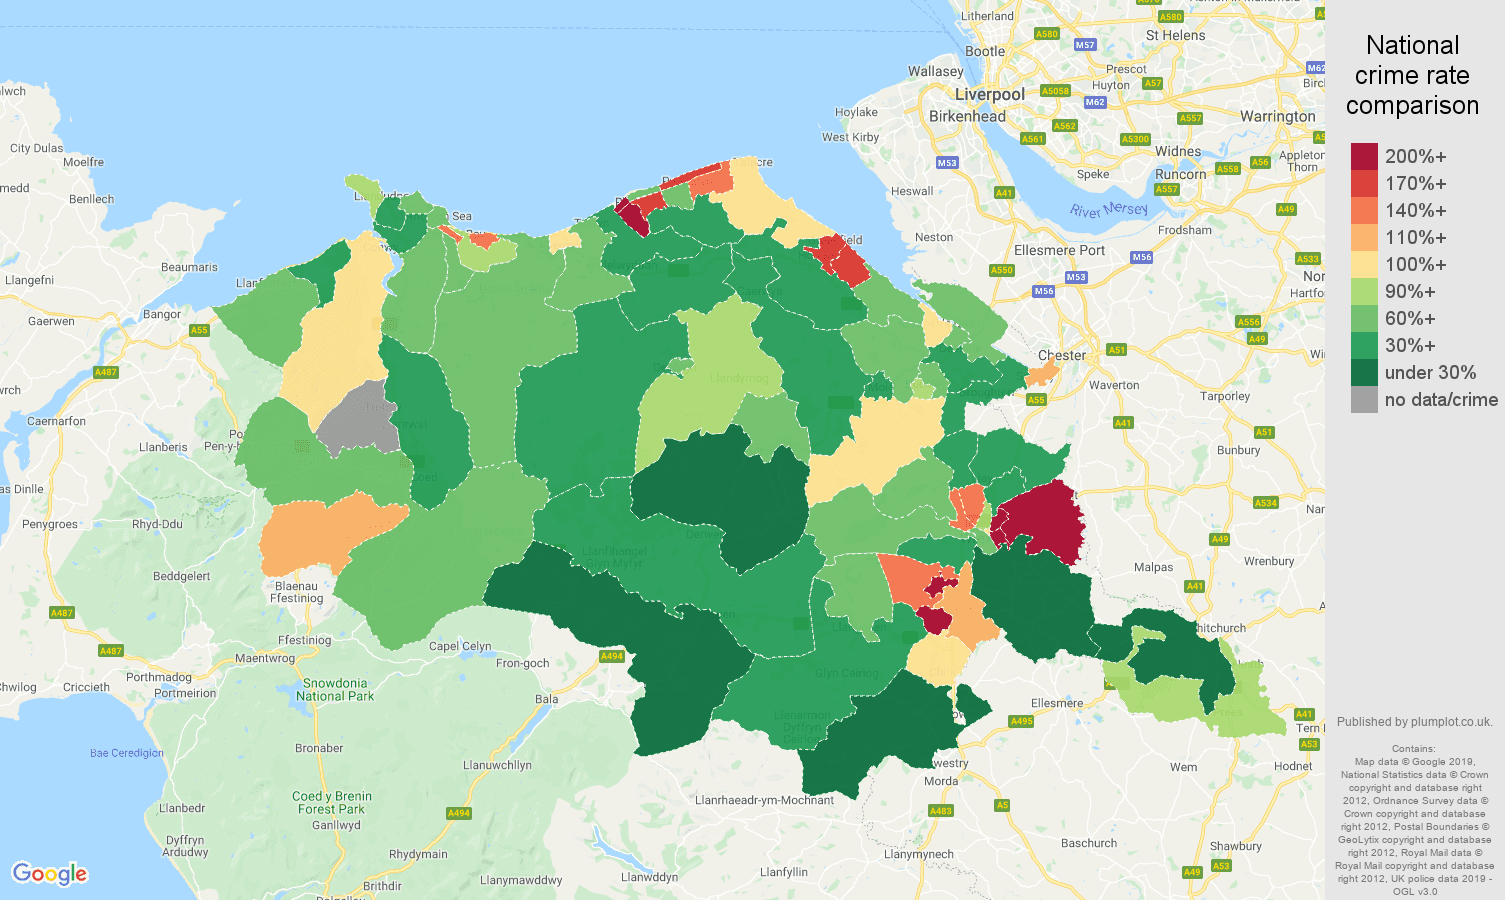 Clwyd other crime rate comparison map